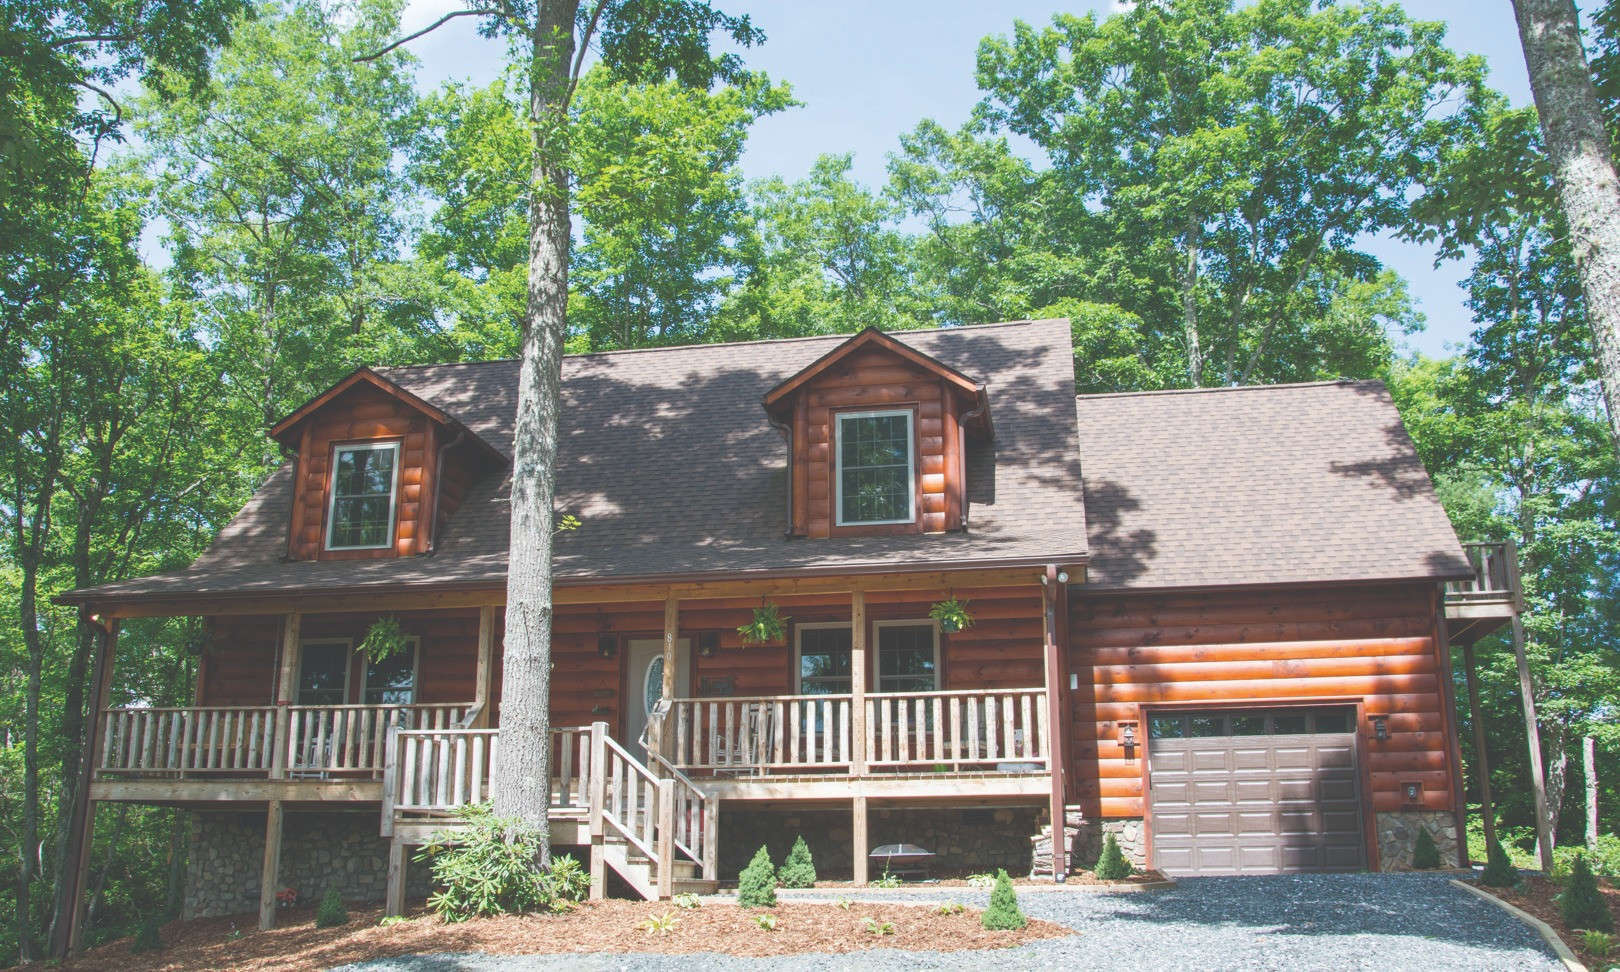 Are you looking for a cabin with common river access for your summer retreats to the North Carolina Mountains? Then take a look at this 3-bedroom, 2.5-bath cabin located in Brightwater on The New River.